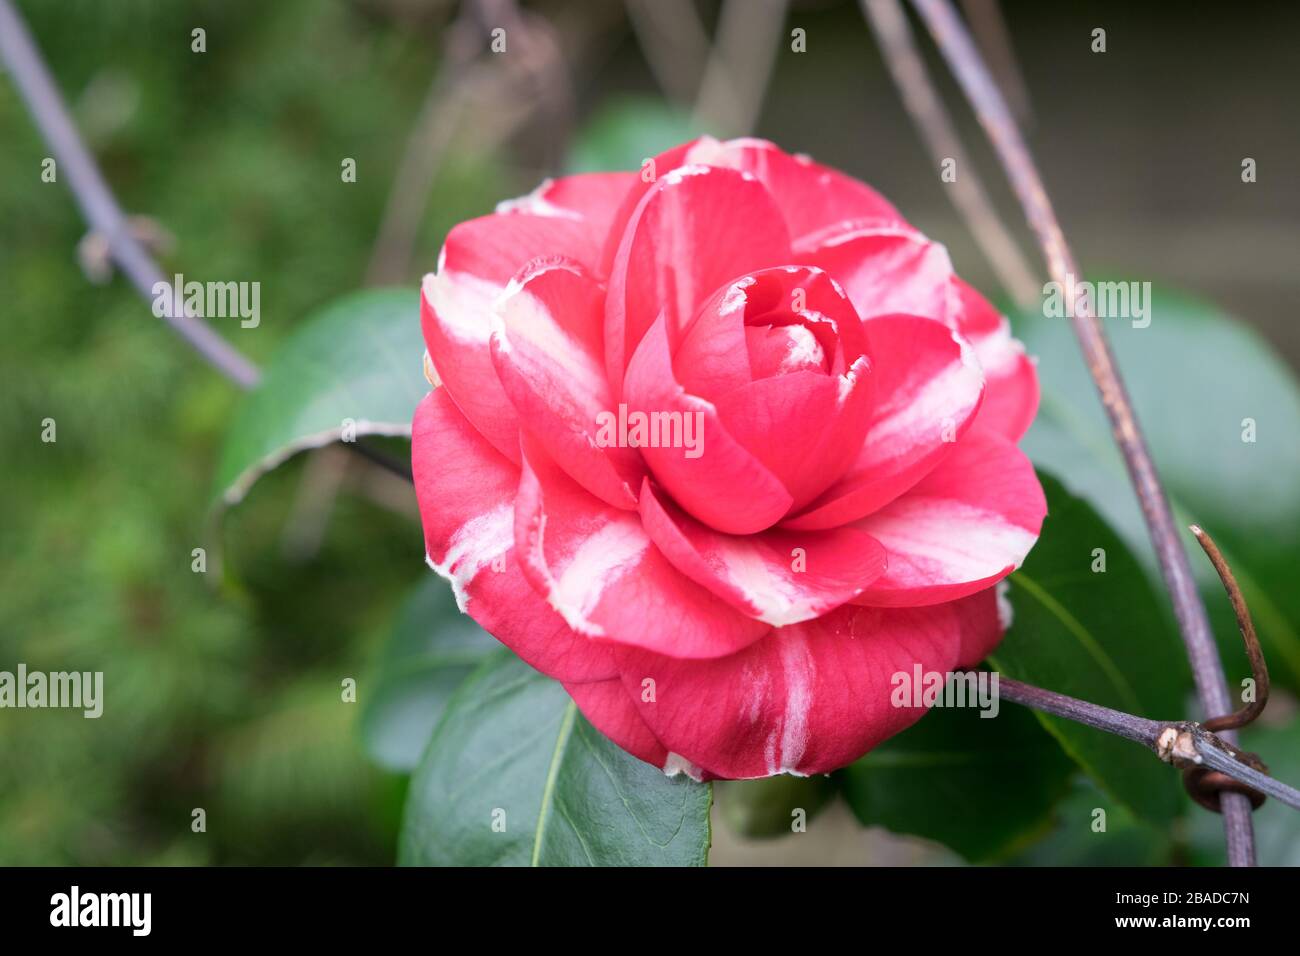 Beautiful image of double flowered red Camellia japonica with white stripes Stock Photo